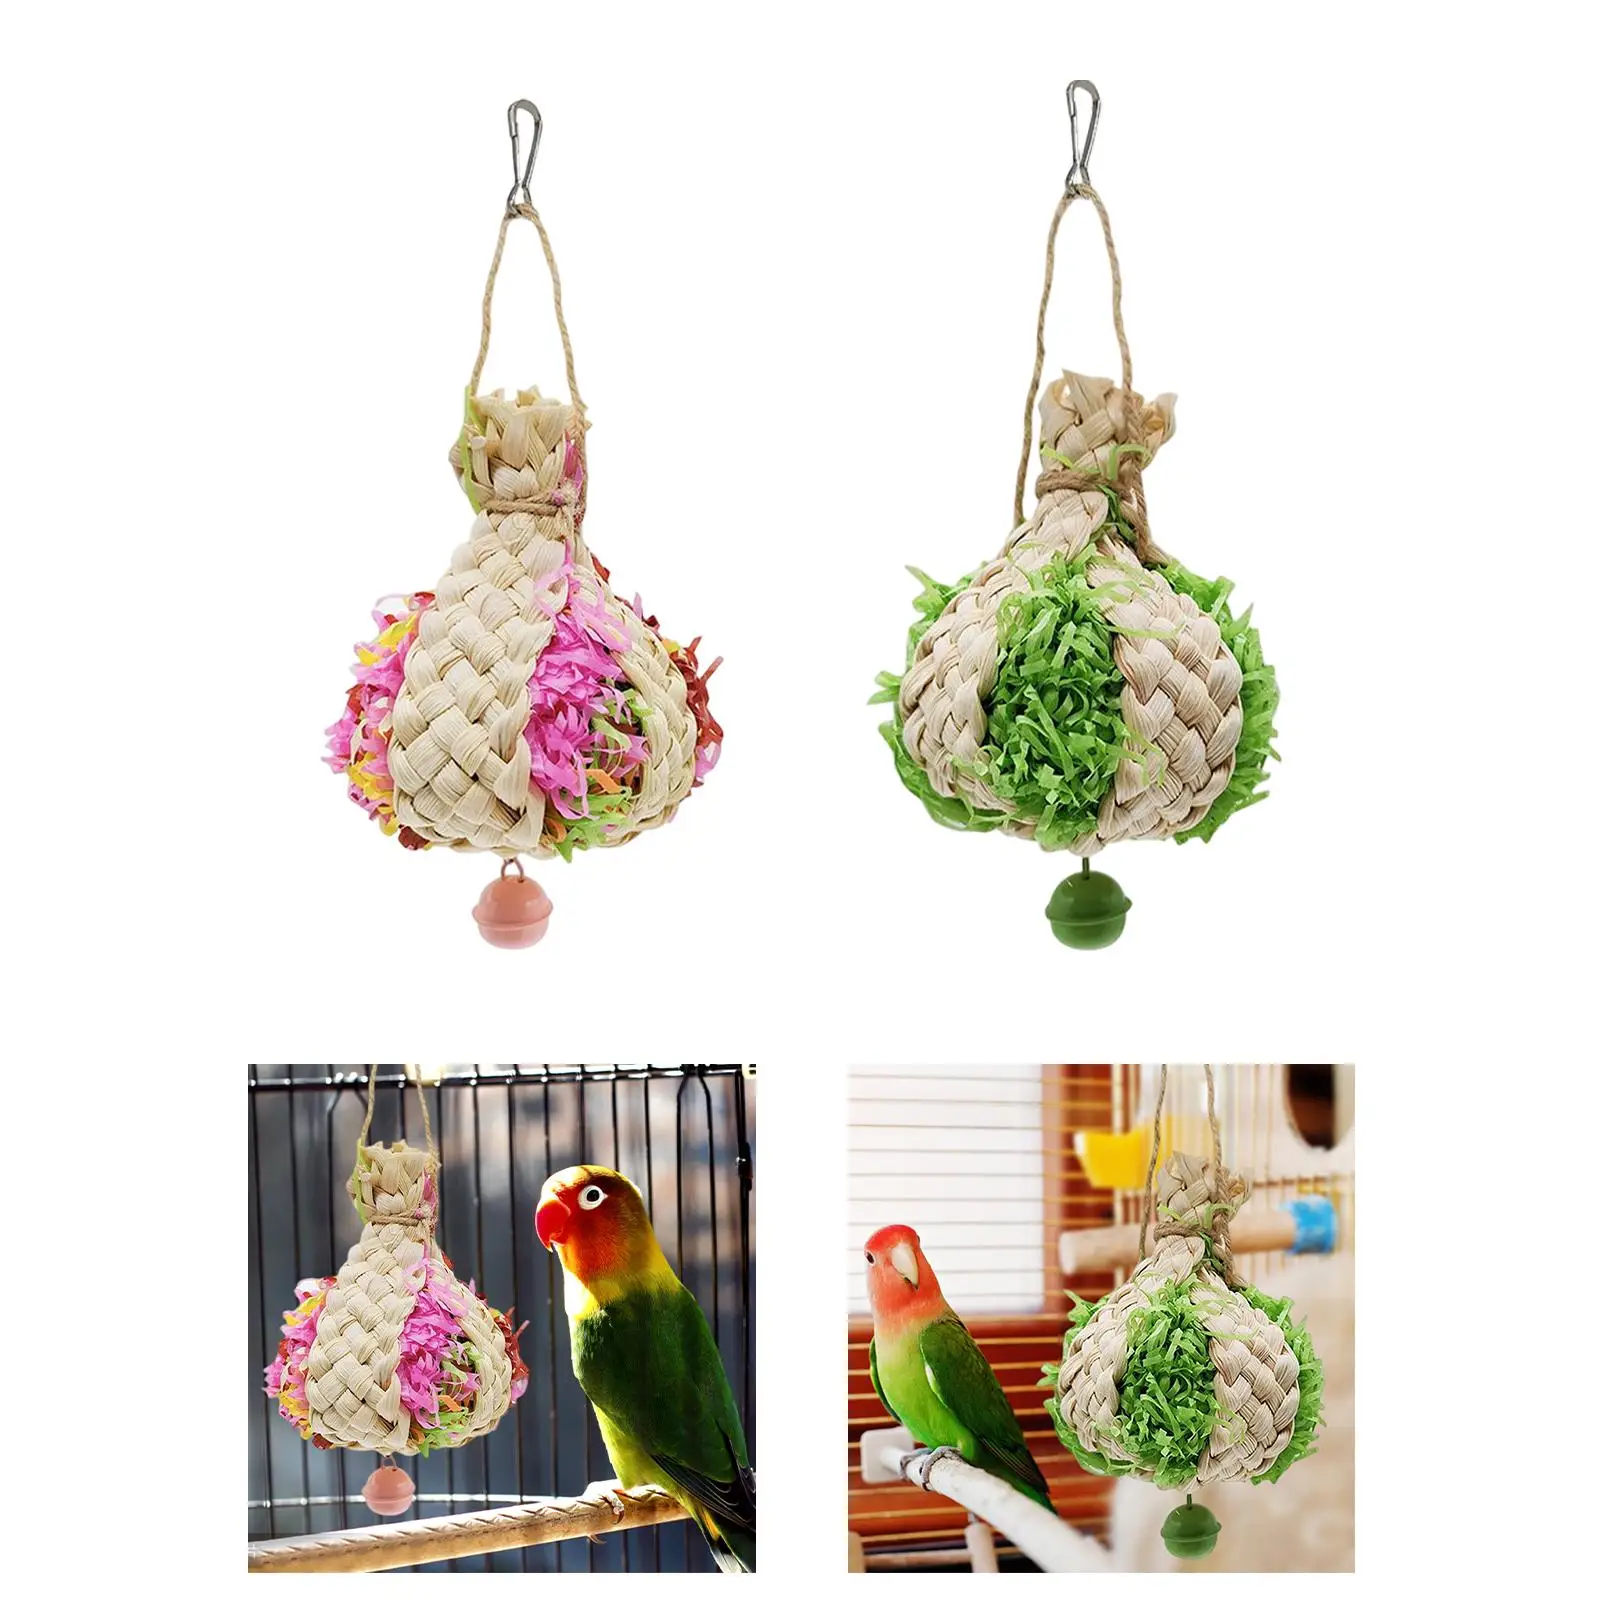 Natural Parrot Shredder Toy Bite Resistant Cage Accessories Entertaining Colorful Lightweight Bird Chewing Toy for Training Toy